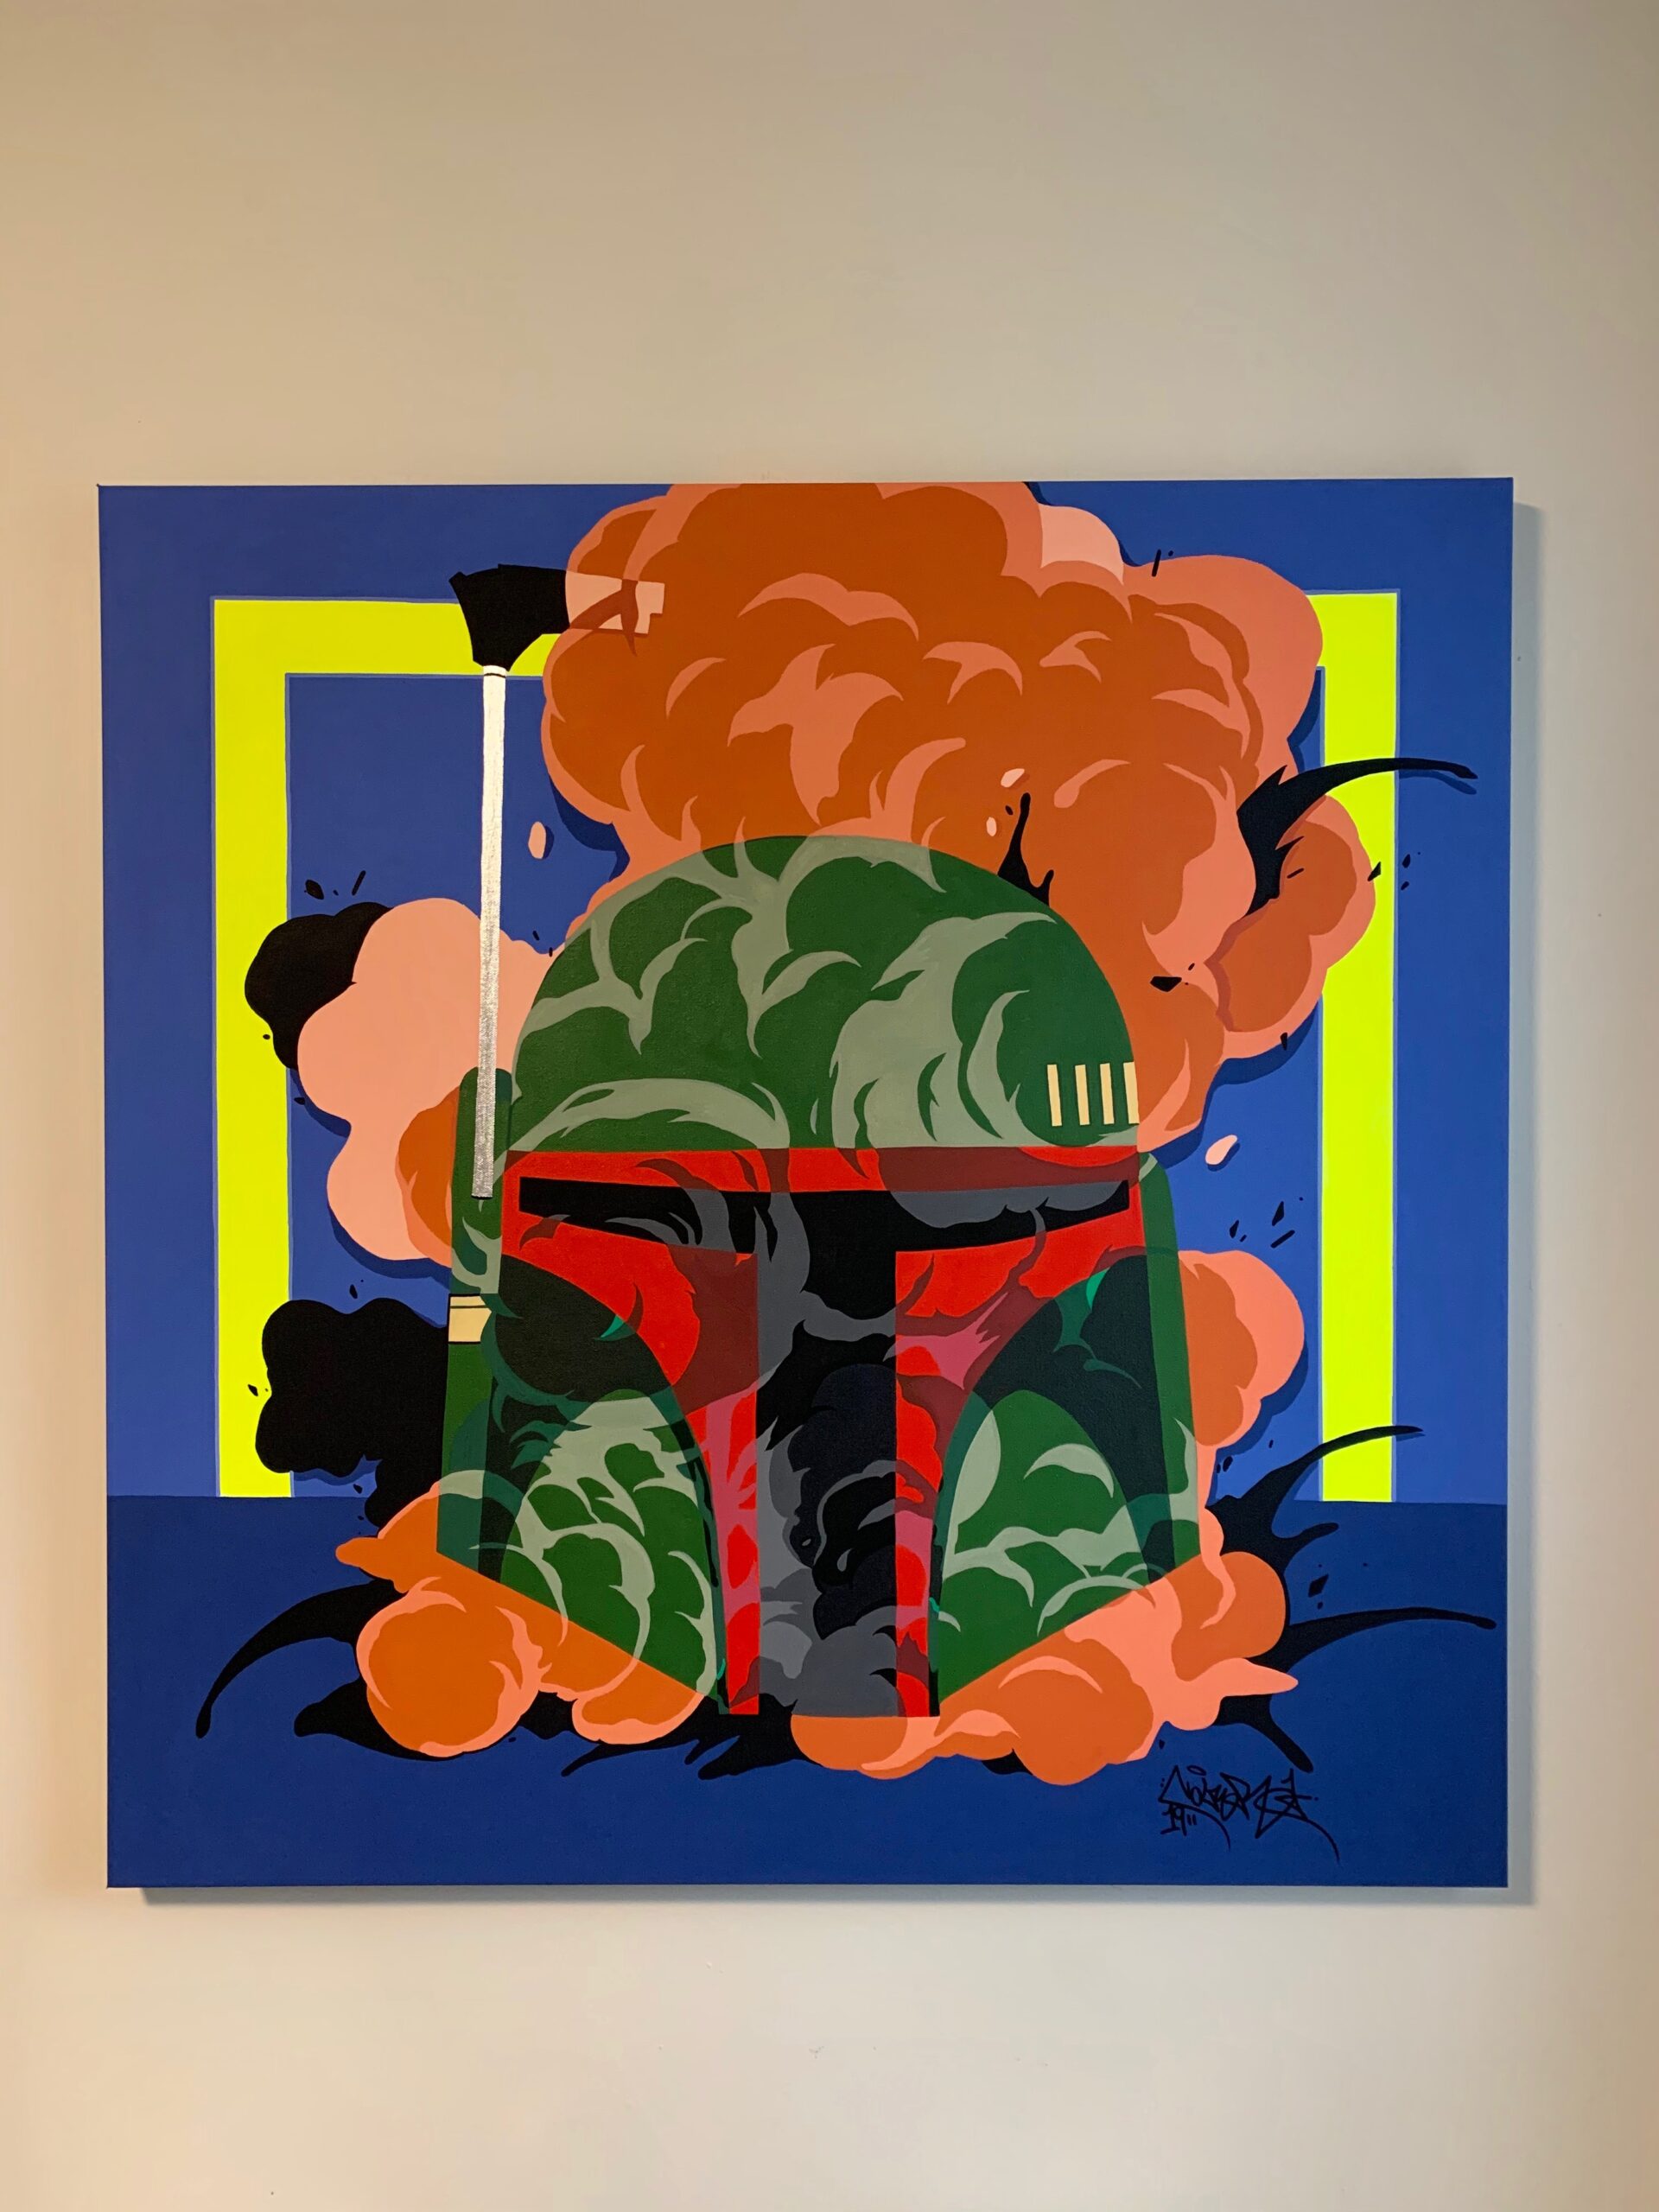 "Mango Fett" 36 x 36, Acrylic Paint on Canvas. Presented at the Akwaaba Gallery in "The Dirty Dozen", 2019.